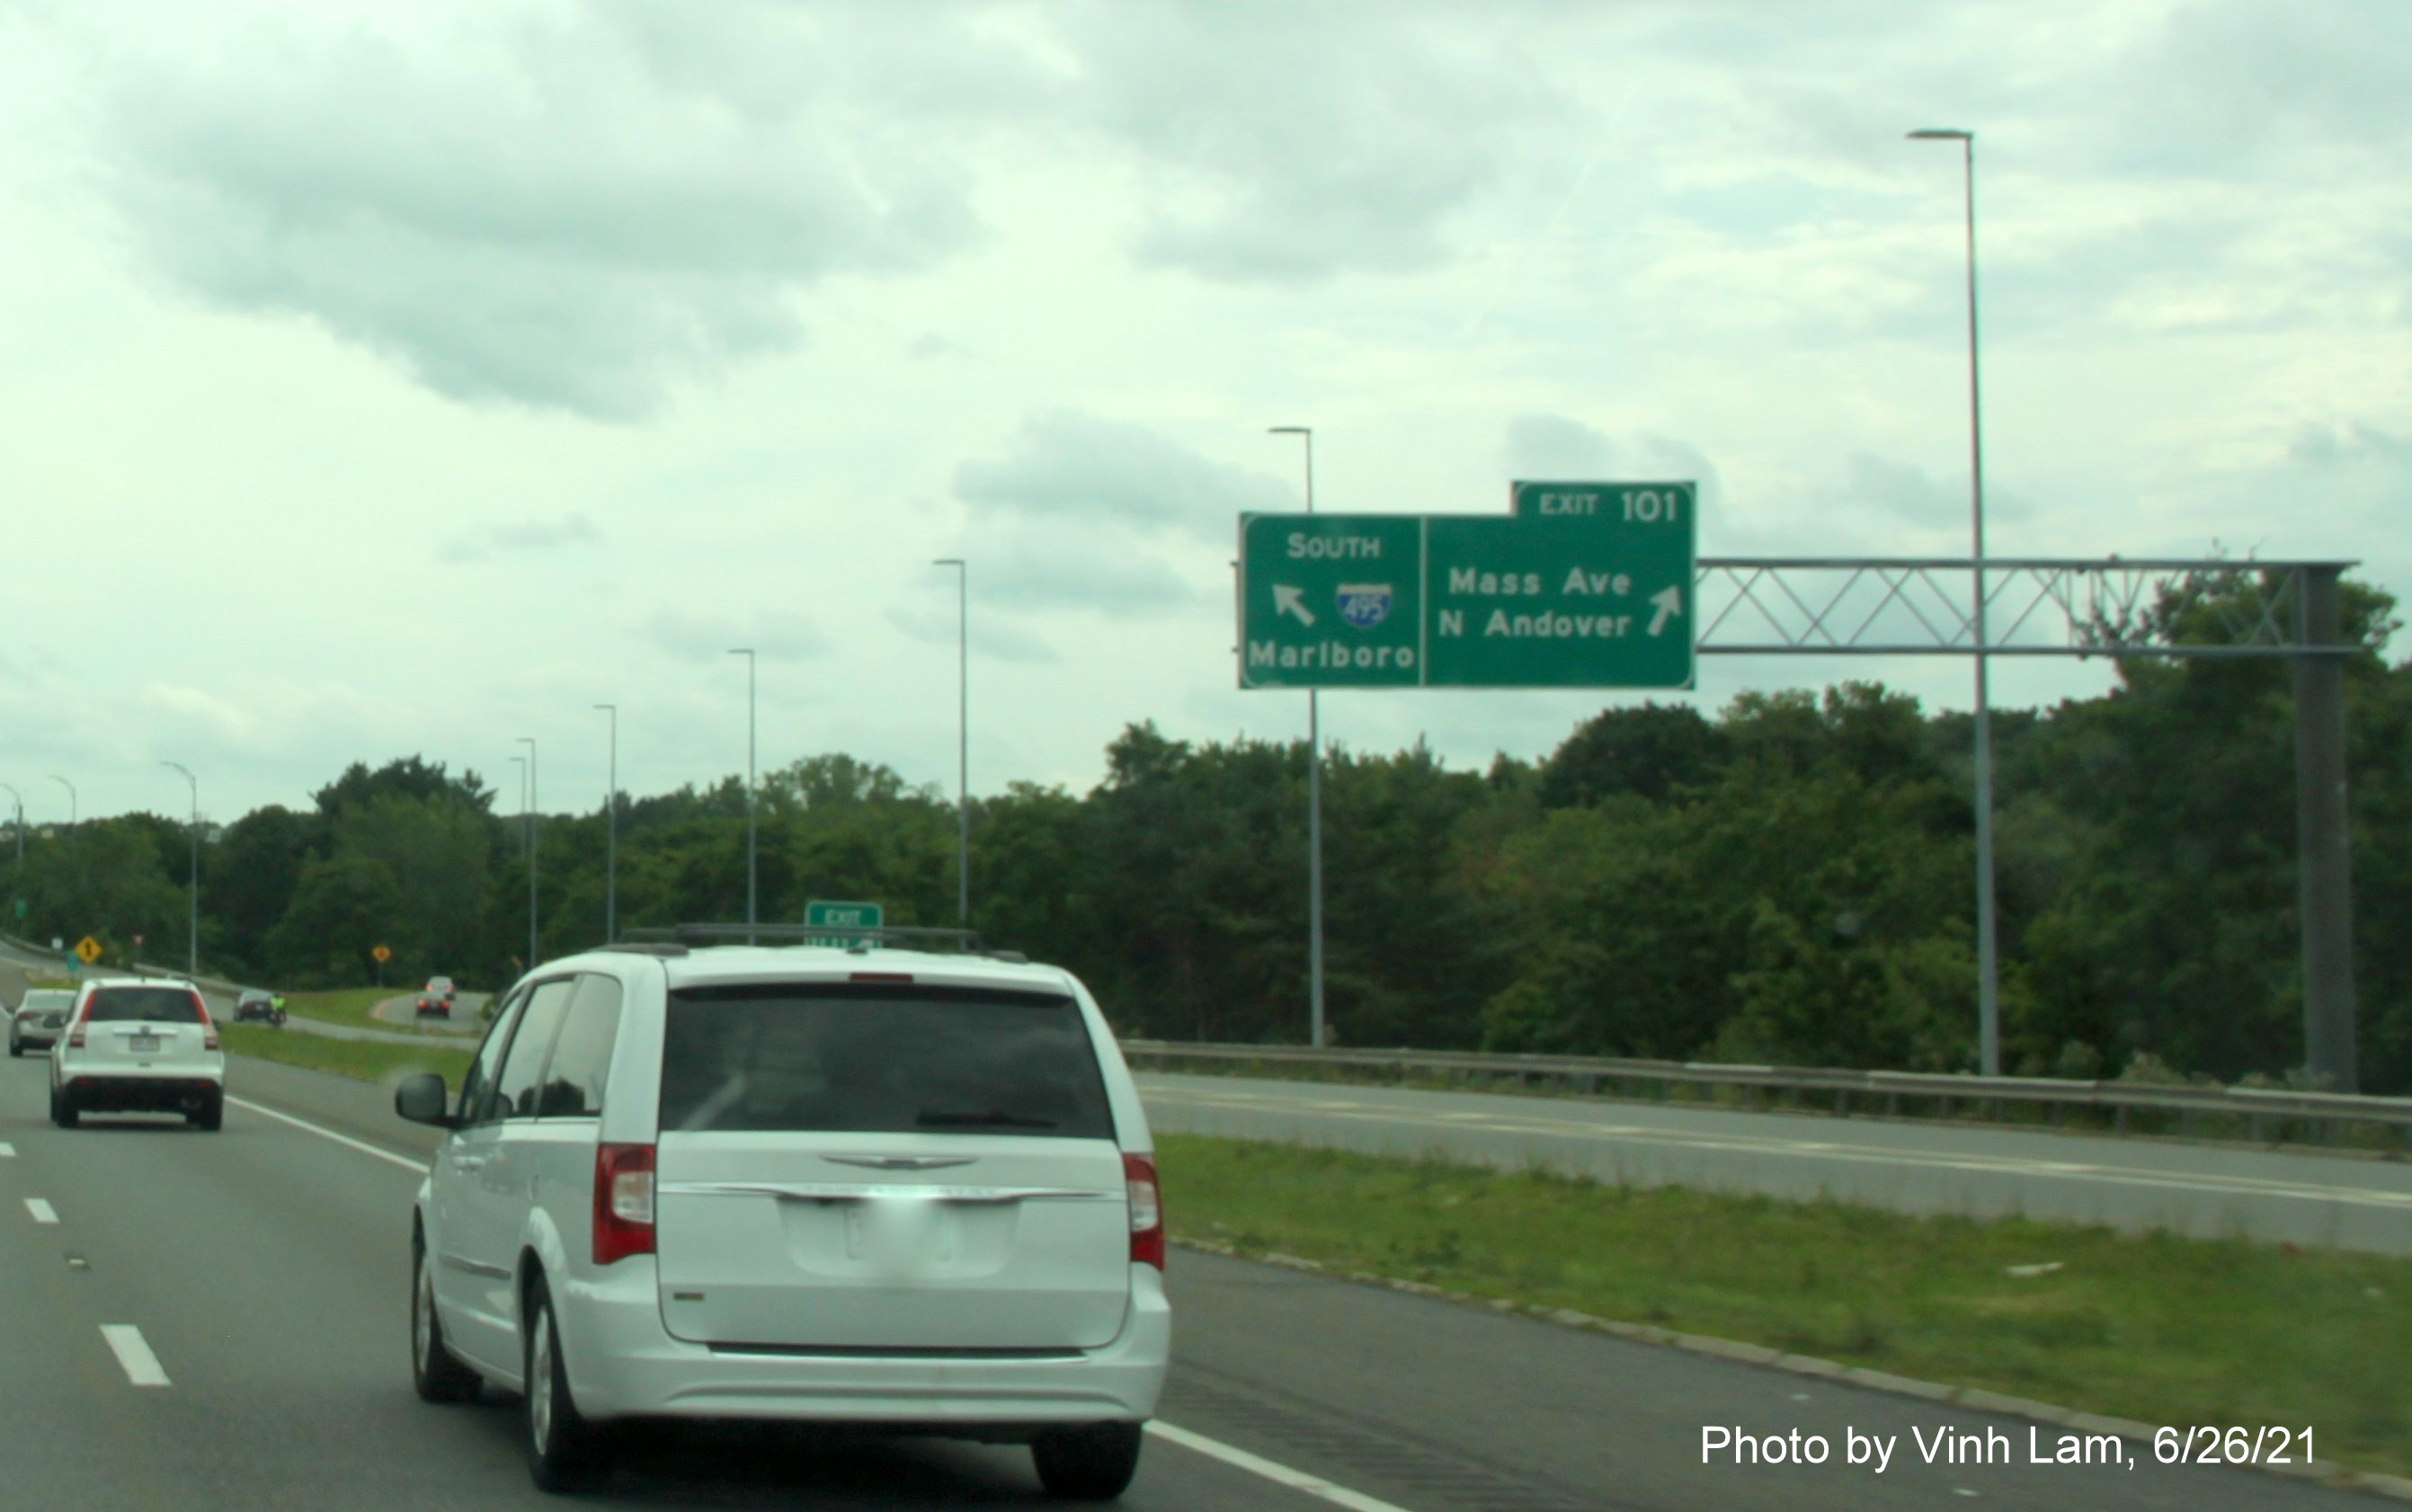 Image of overhead ramp sign for Mass. Avenue exit with new milepost based exit number as seen from I-495 South in Lawrence, by Vinh Lam, June 2021